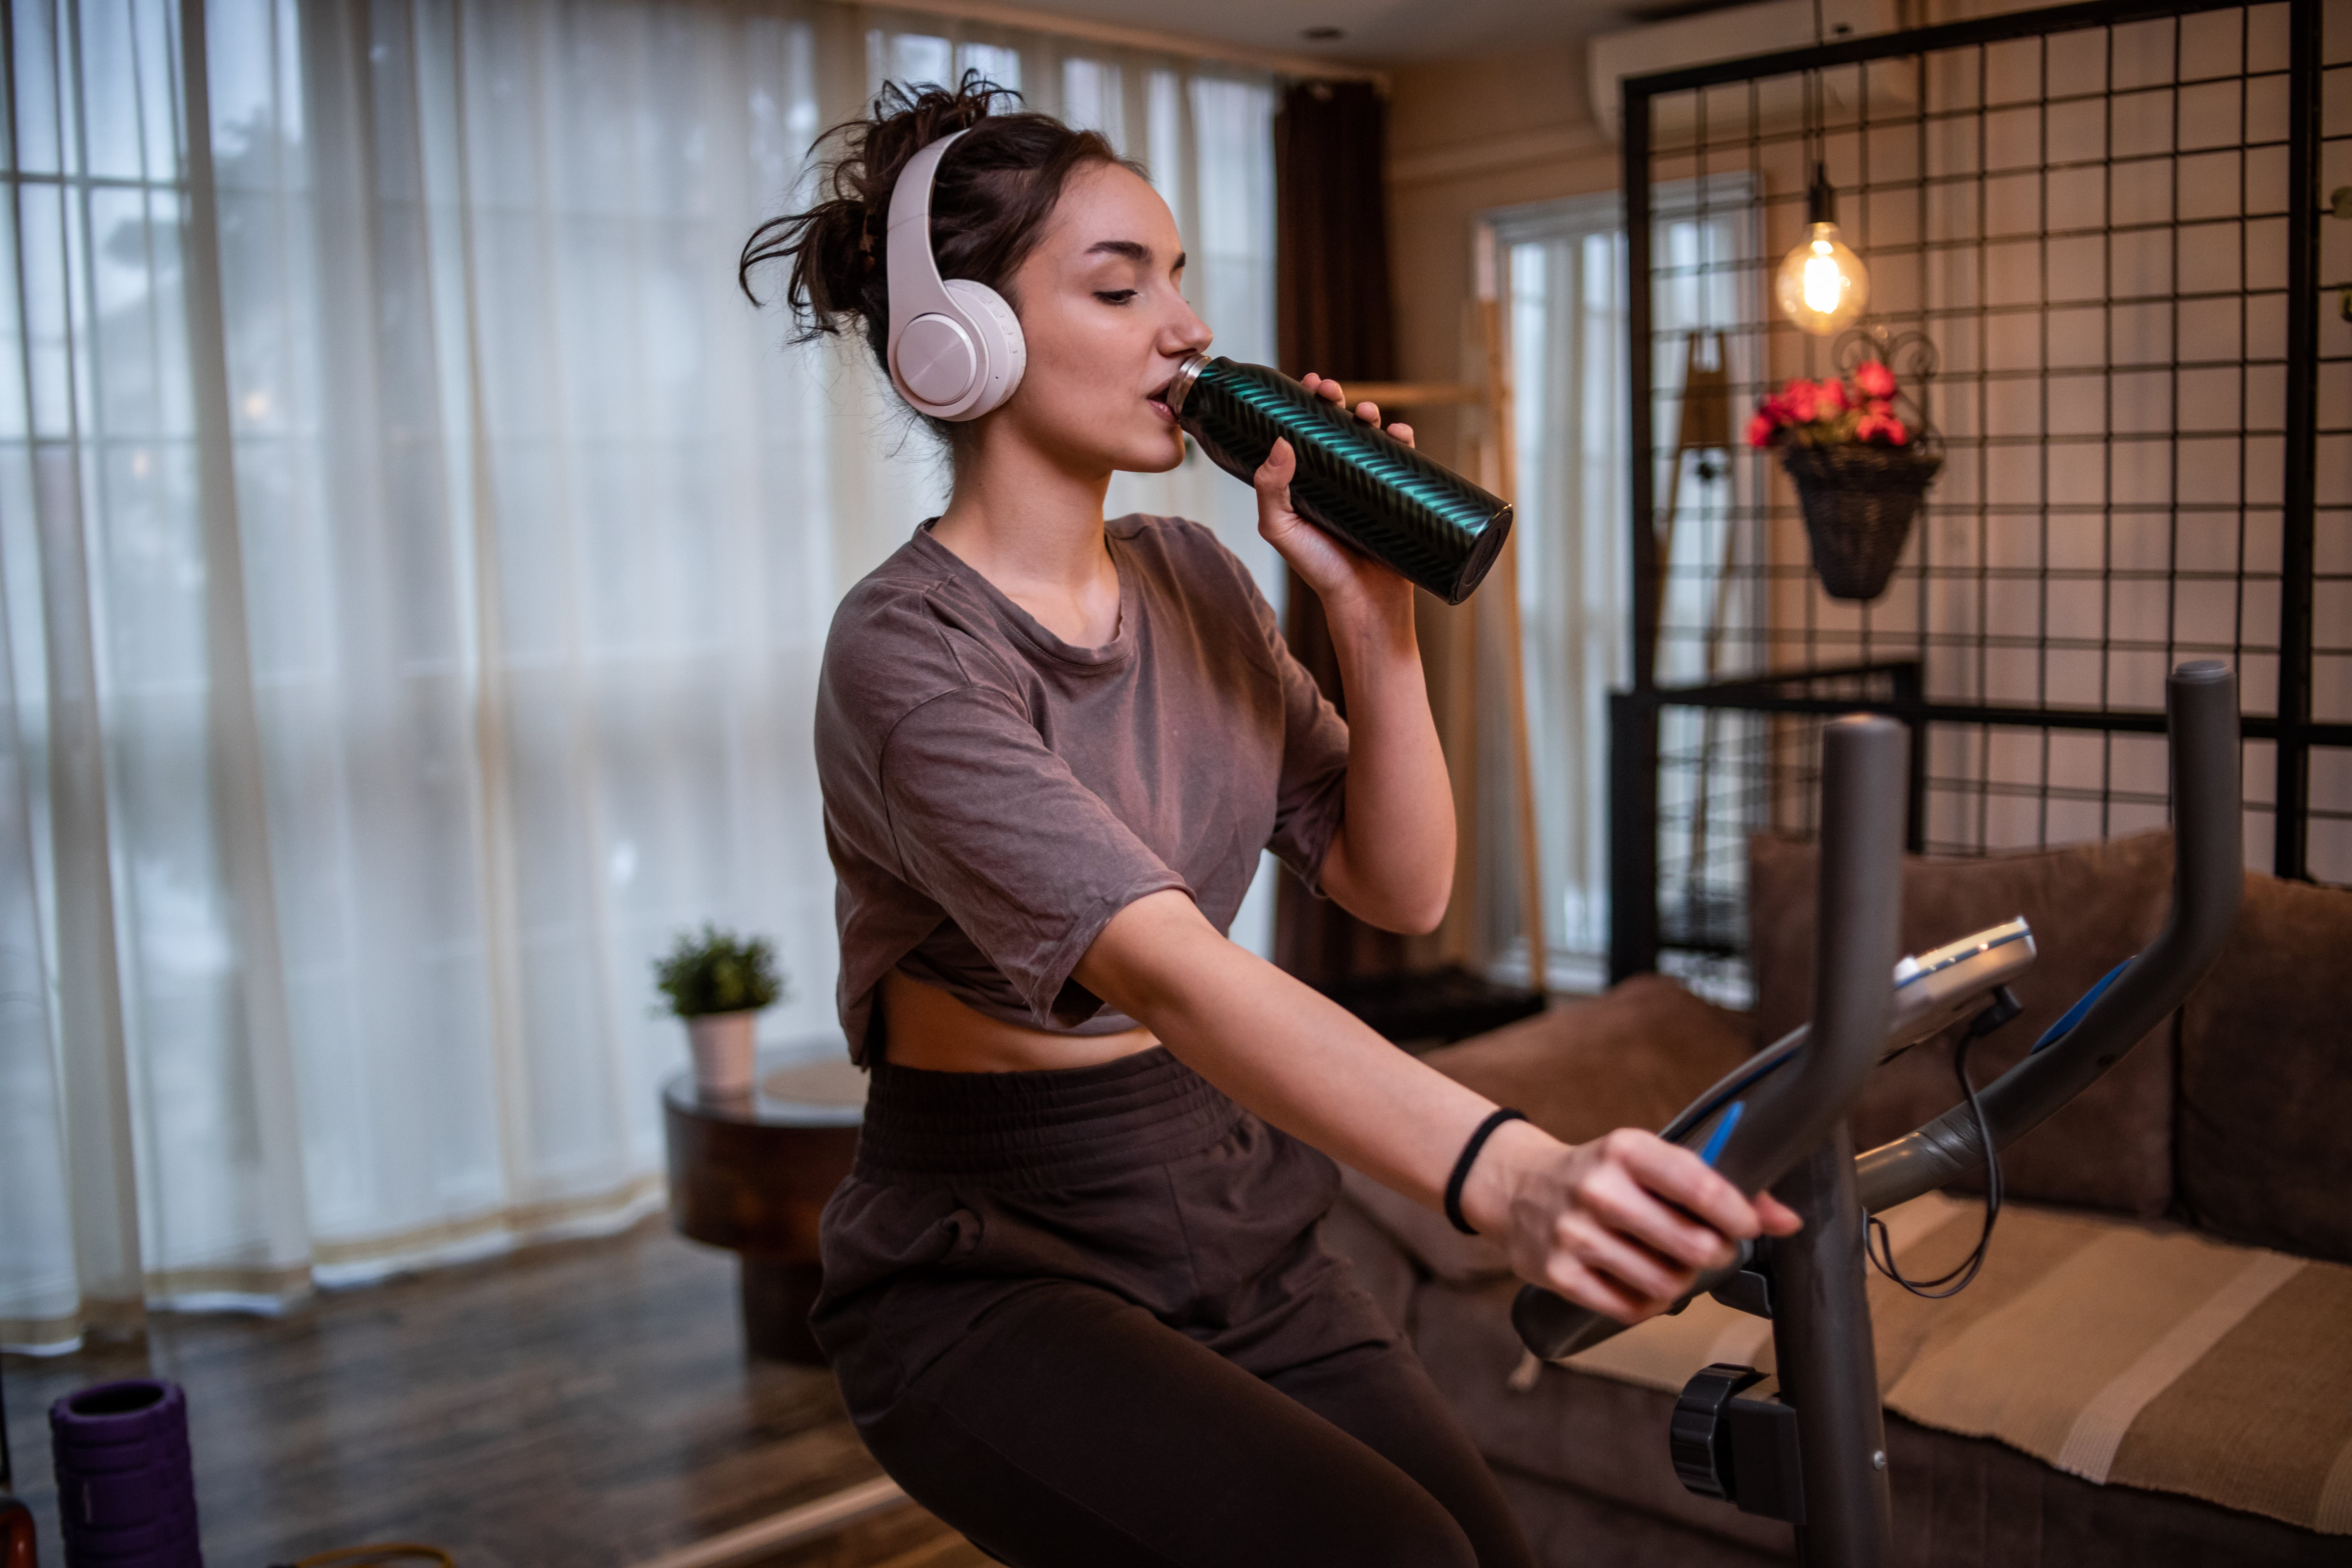 Have You Heard of Cozy Cardio? Learn All About the Latest Fitness Trend —  And Give It a Try - Nice News